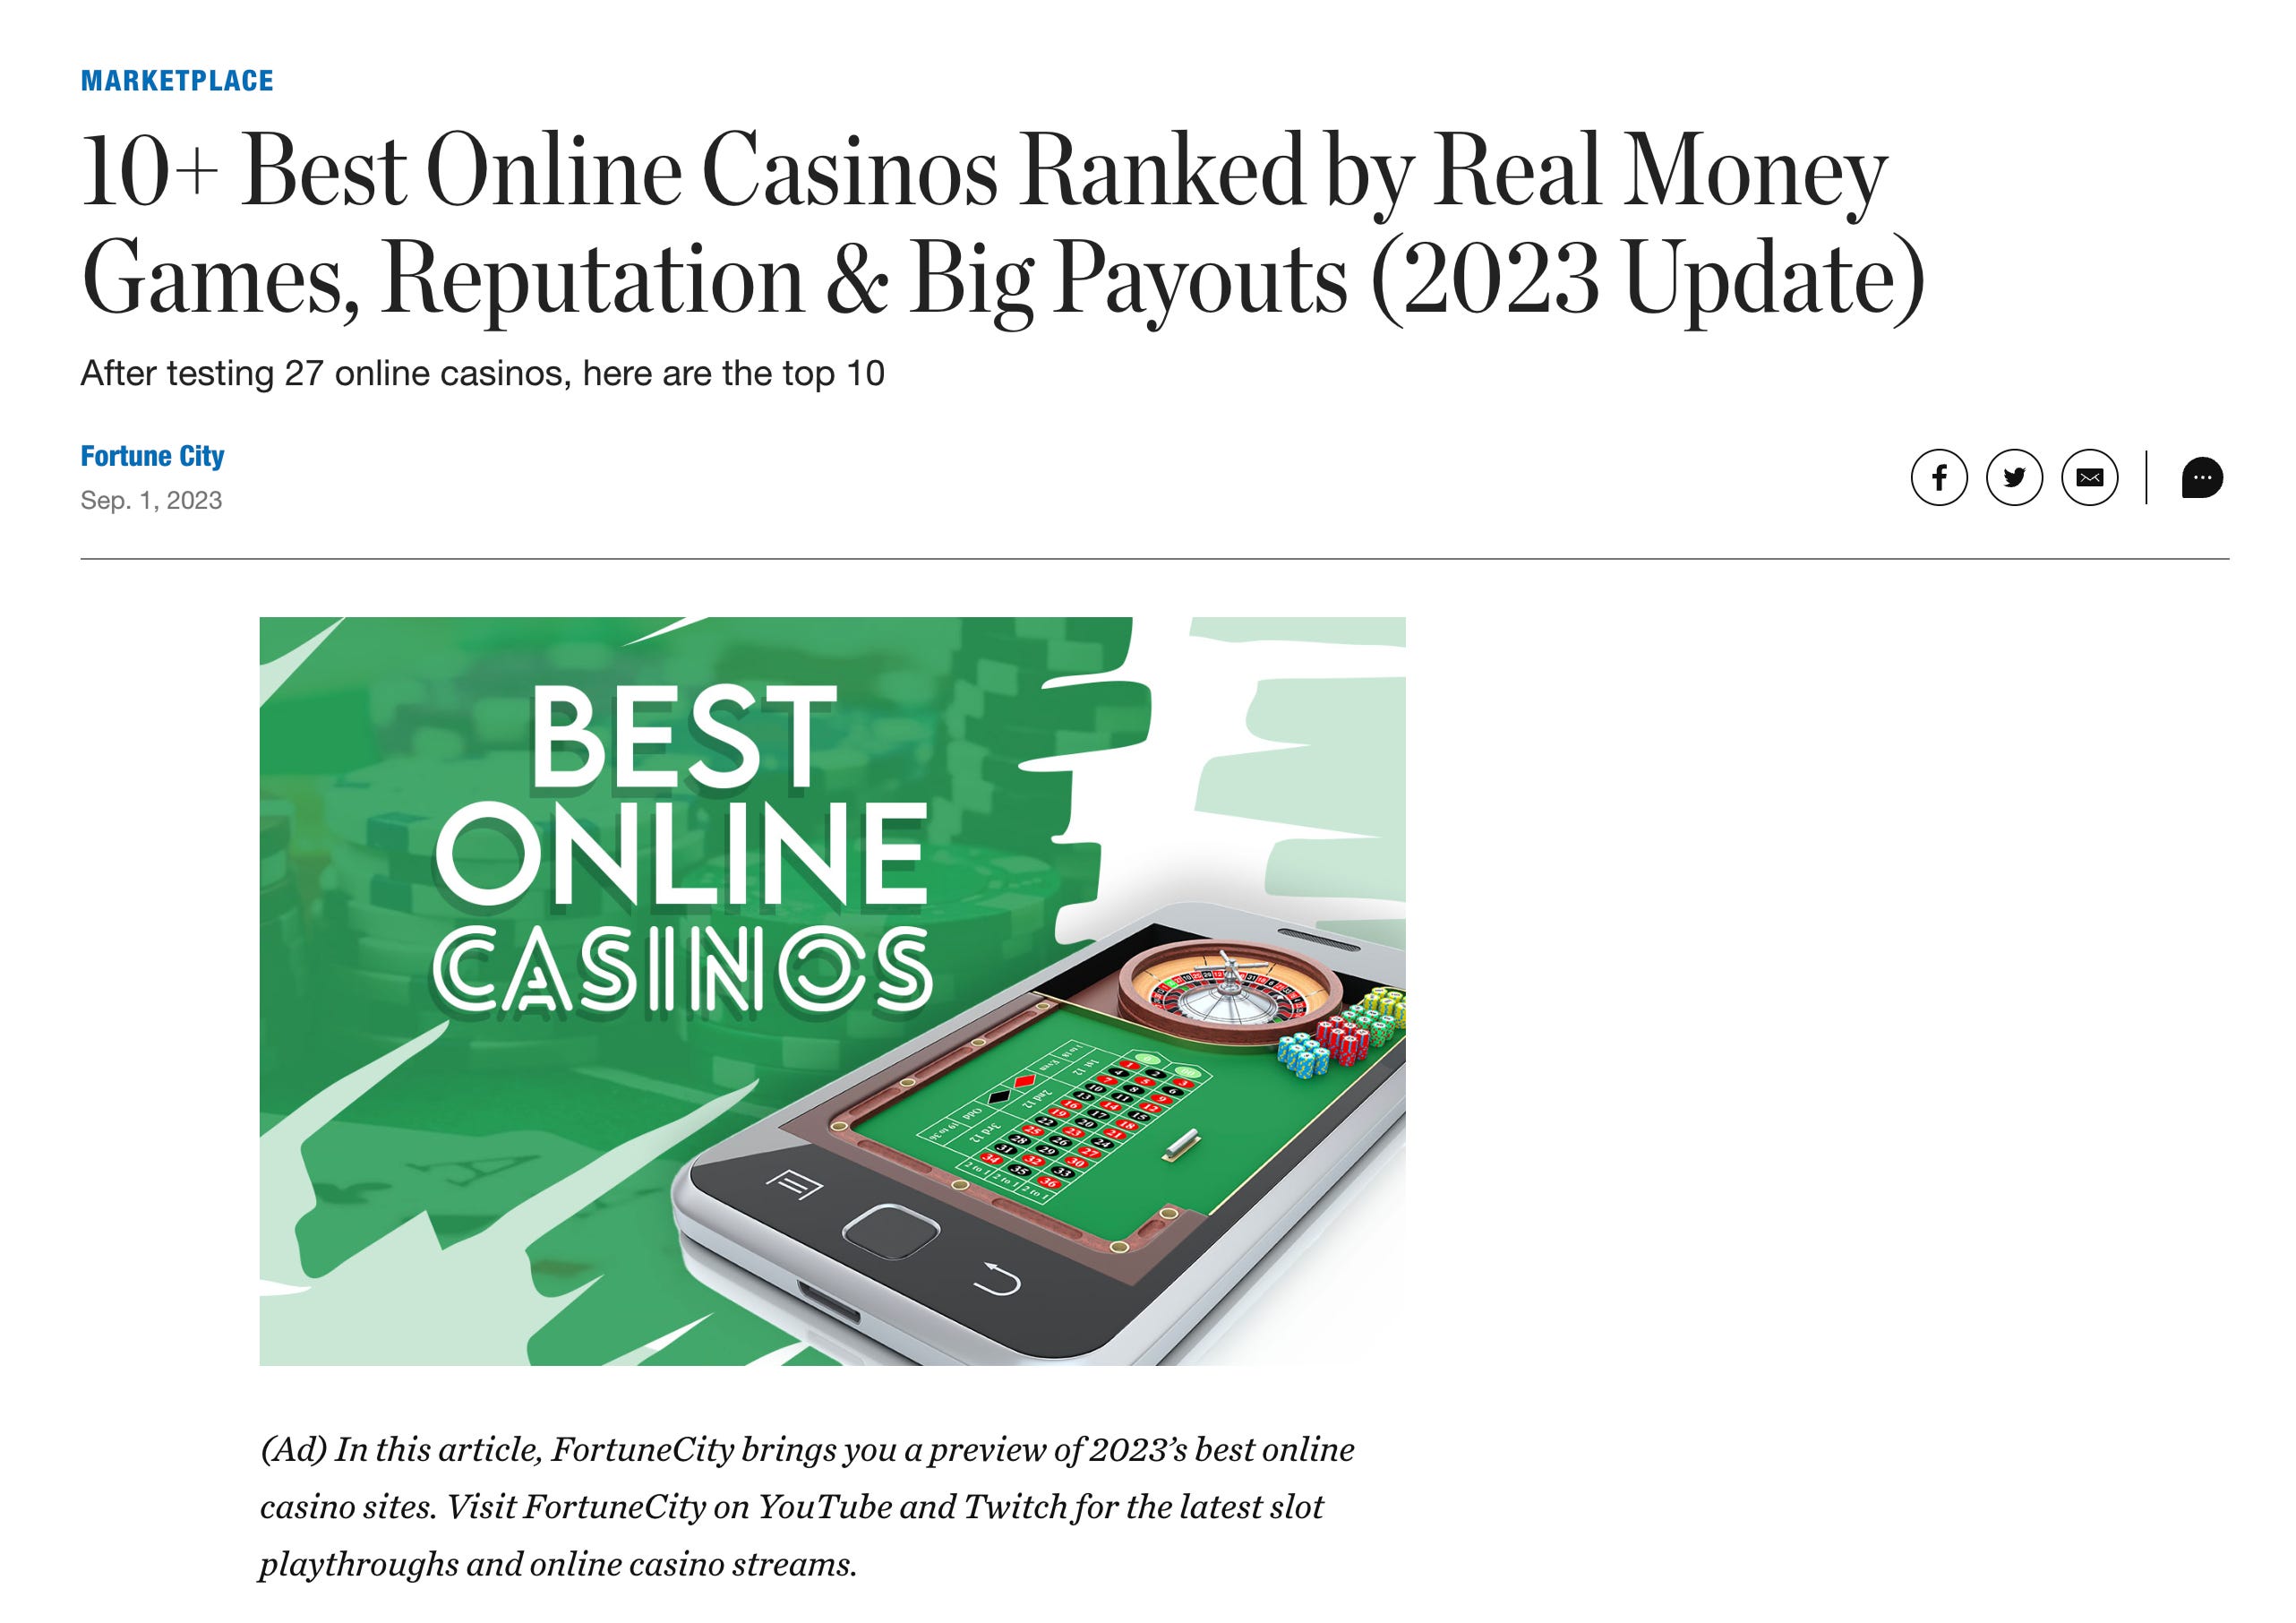 Legal Online Casino, Play With Real Money